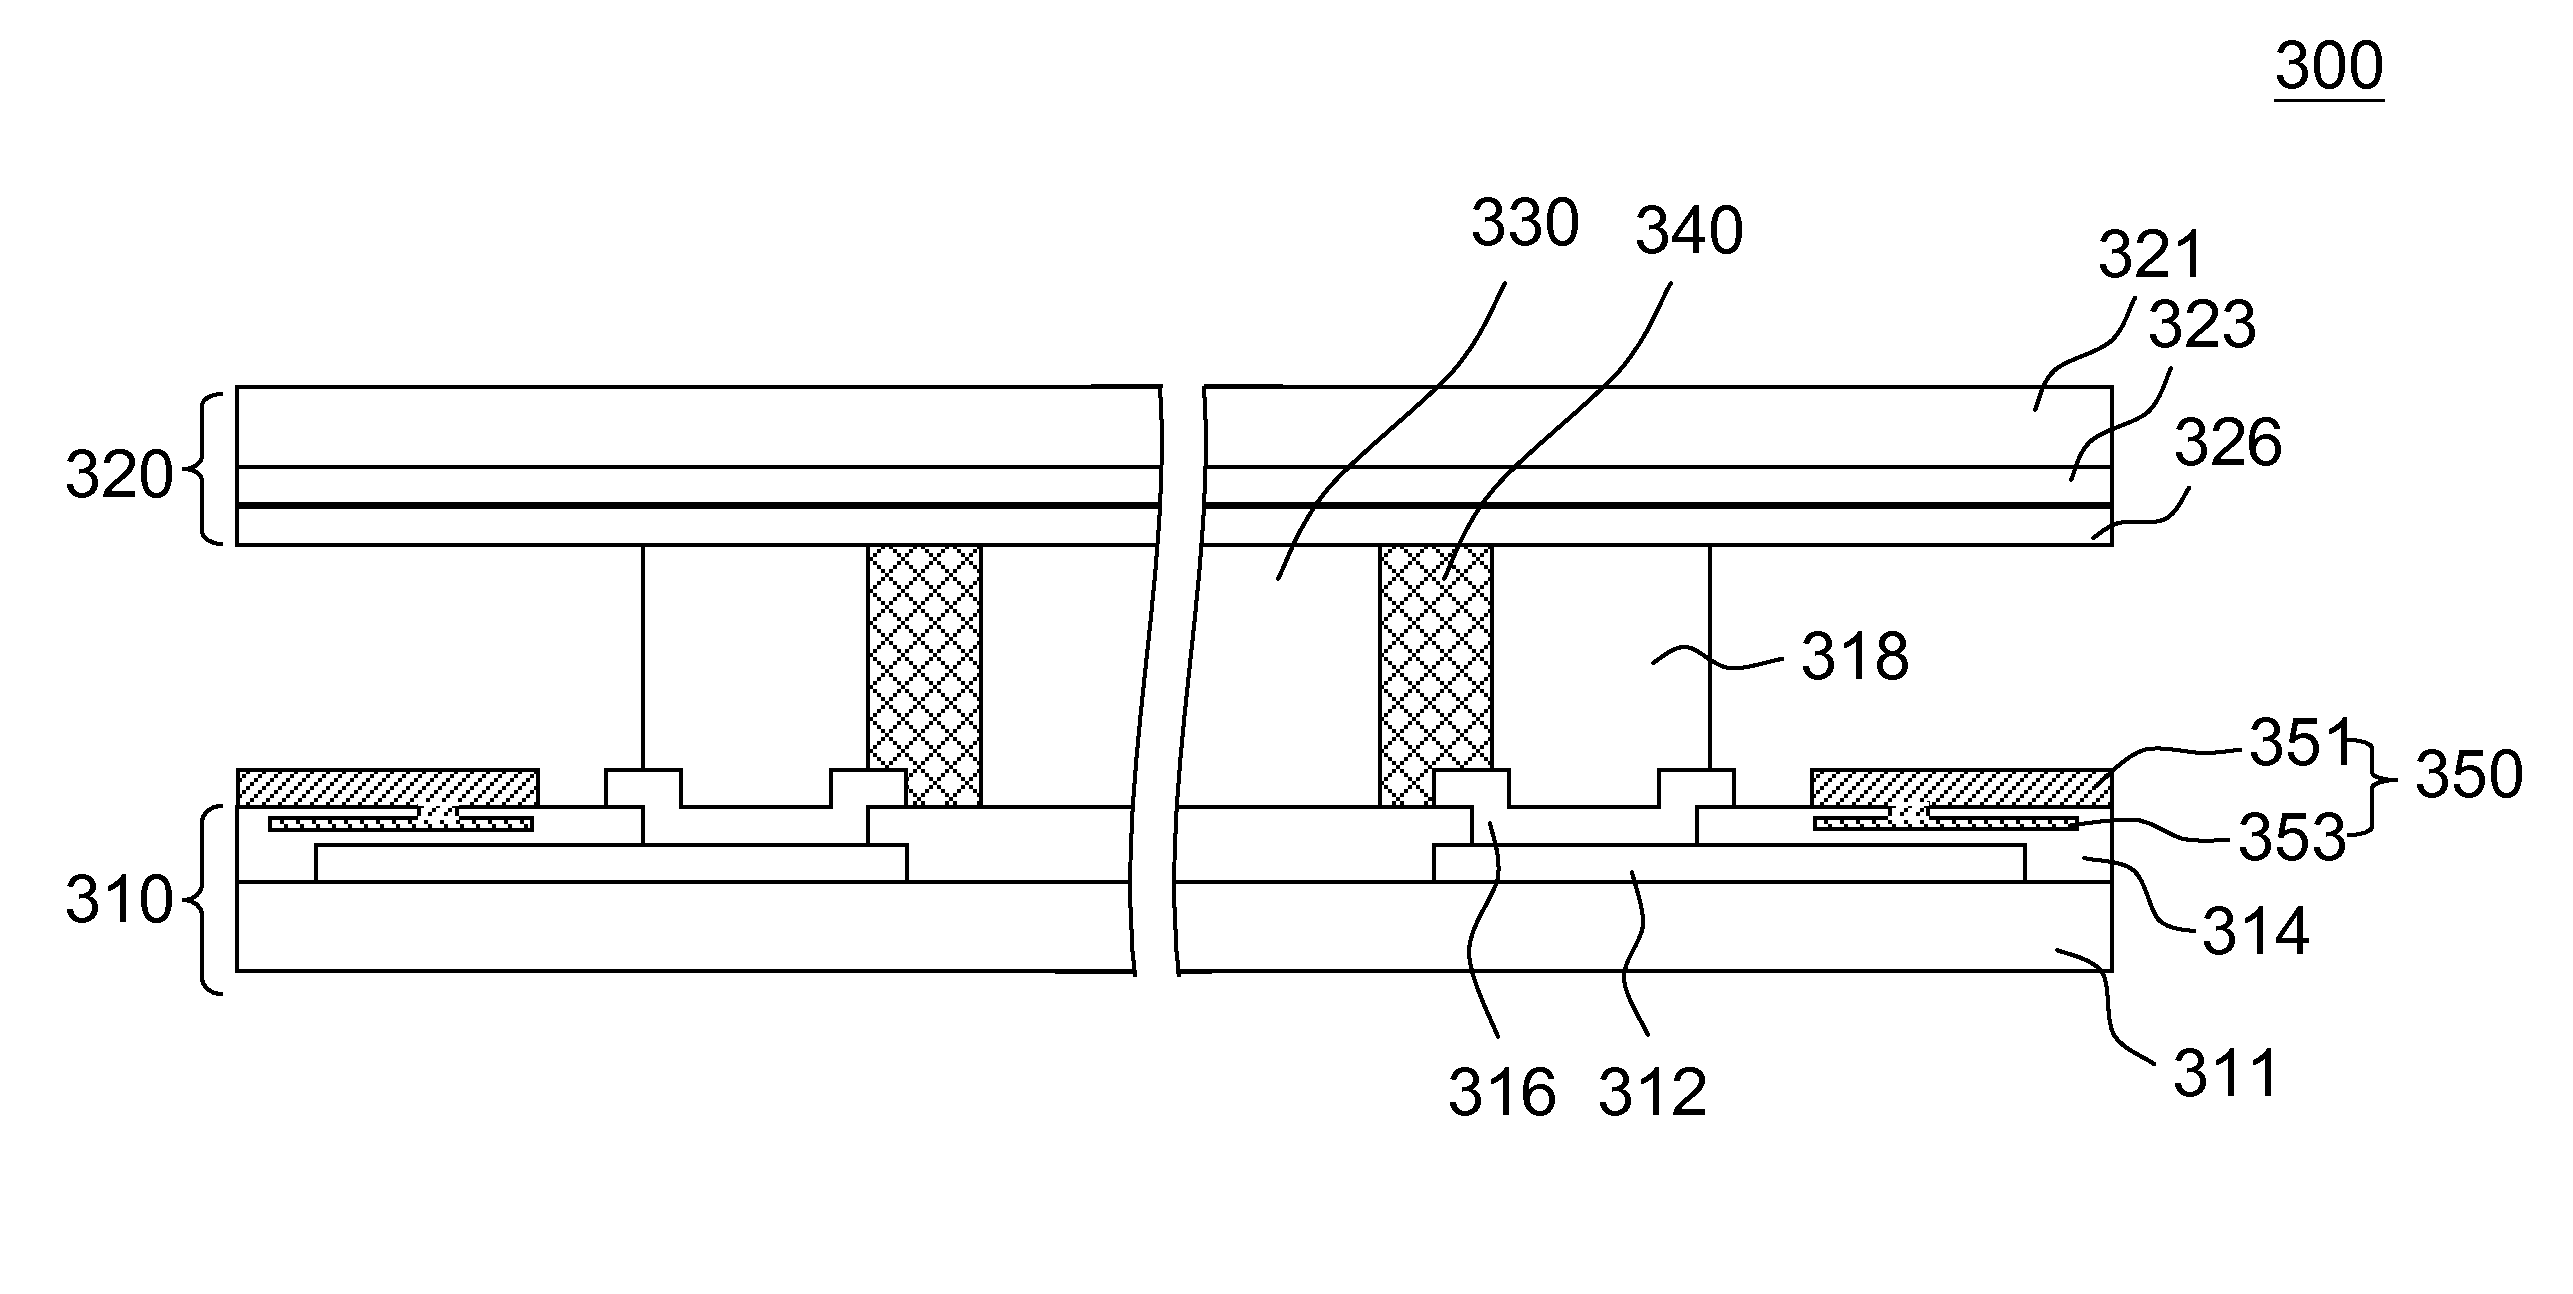 Liquid crystal display panel with electrostatic protection structure